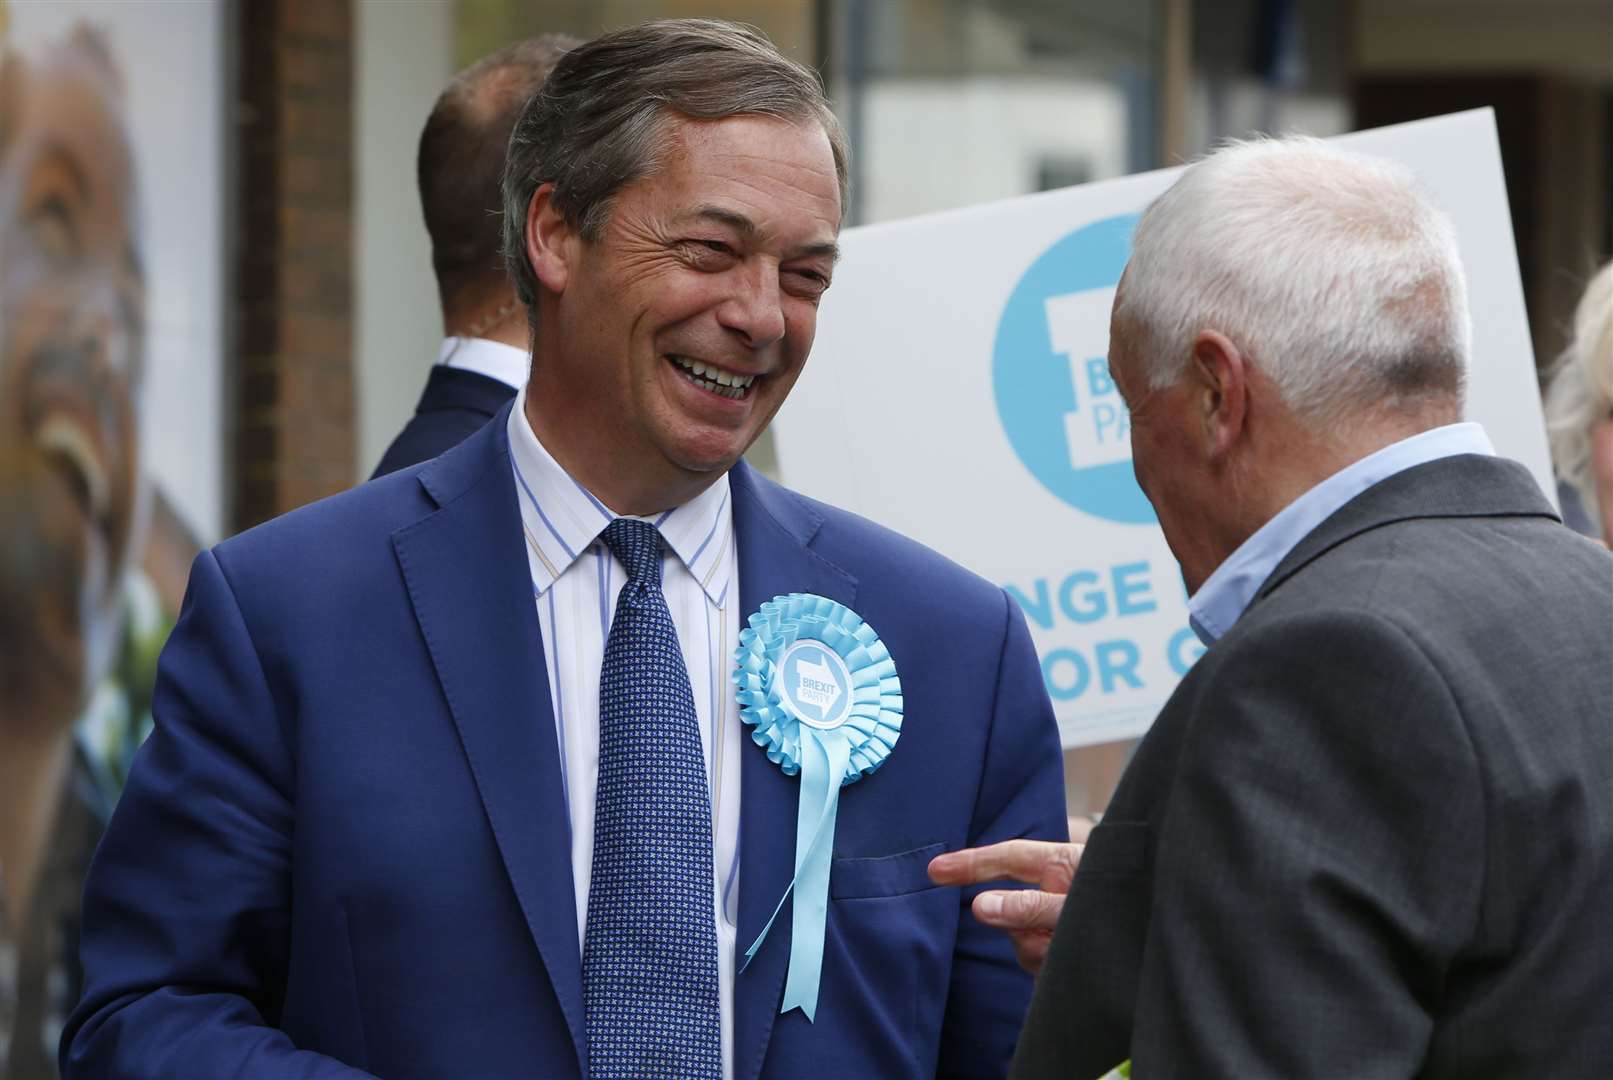 Brexit Party leader Nigel Farage visiting Gravesend ahead of the European Elections